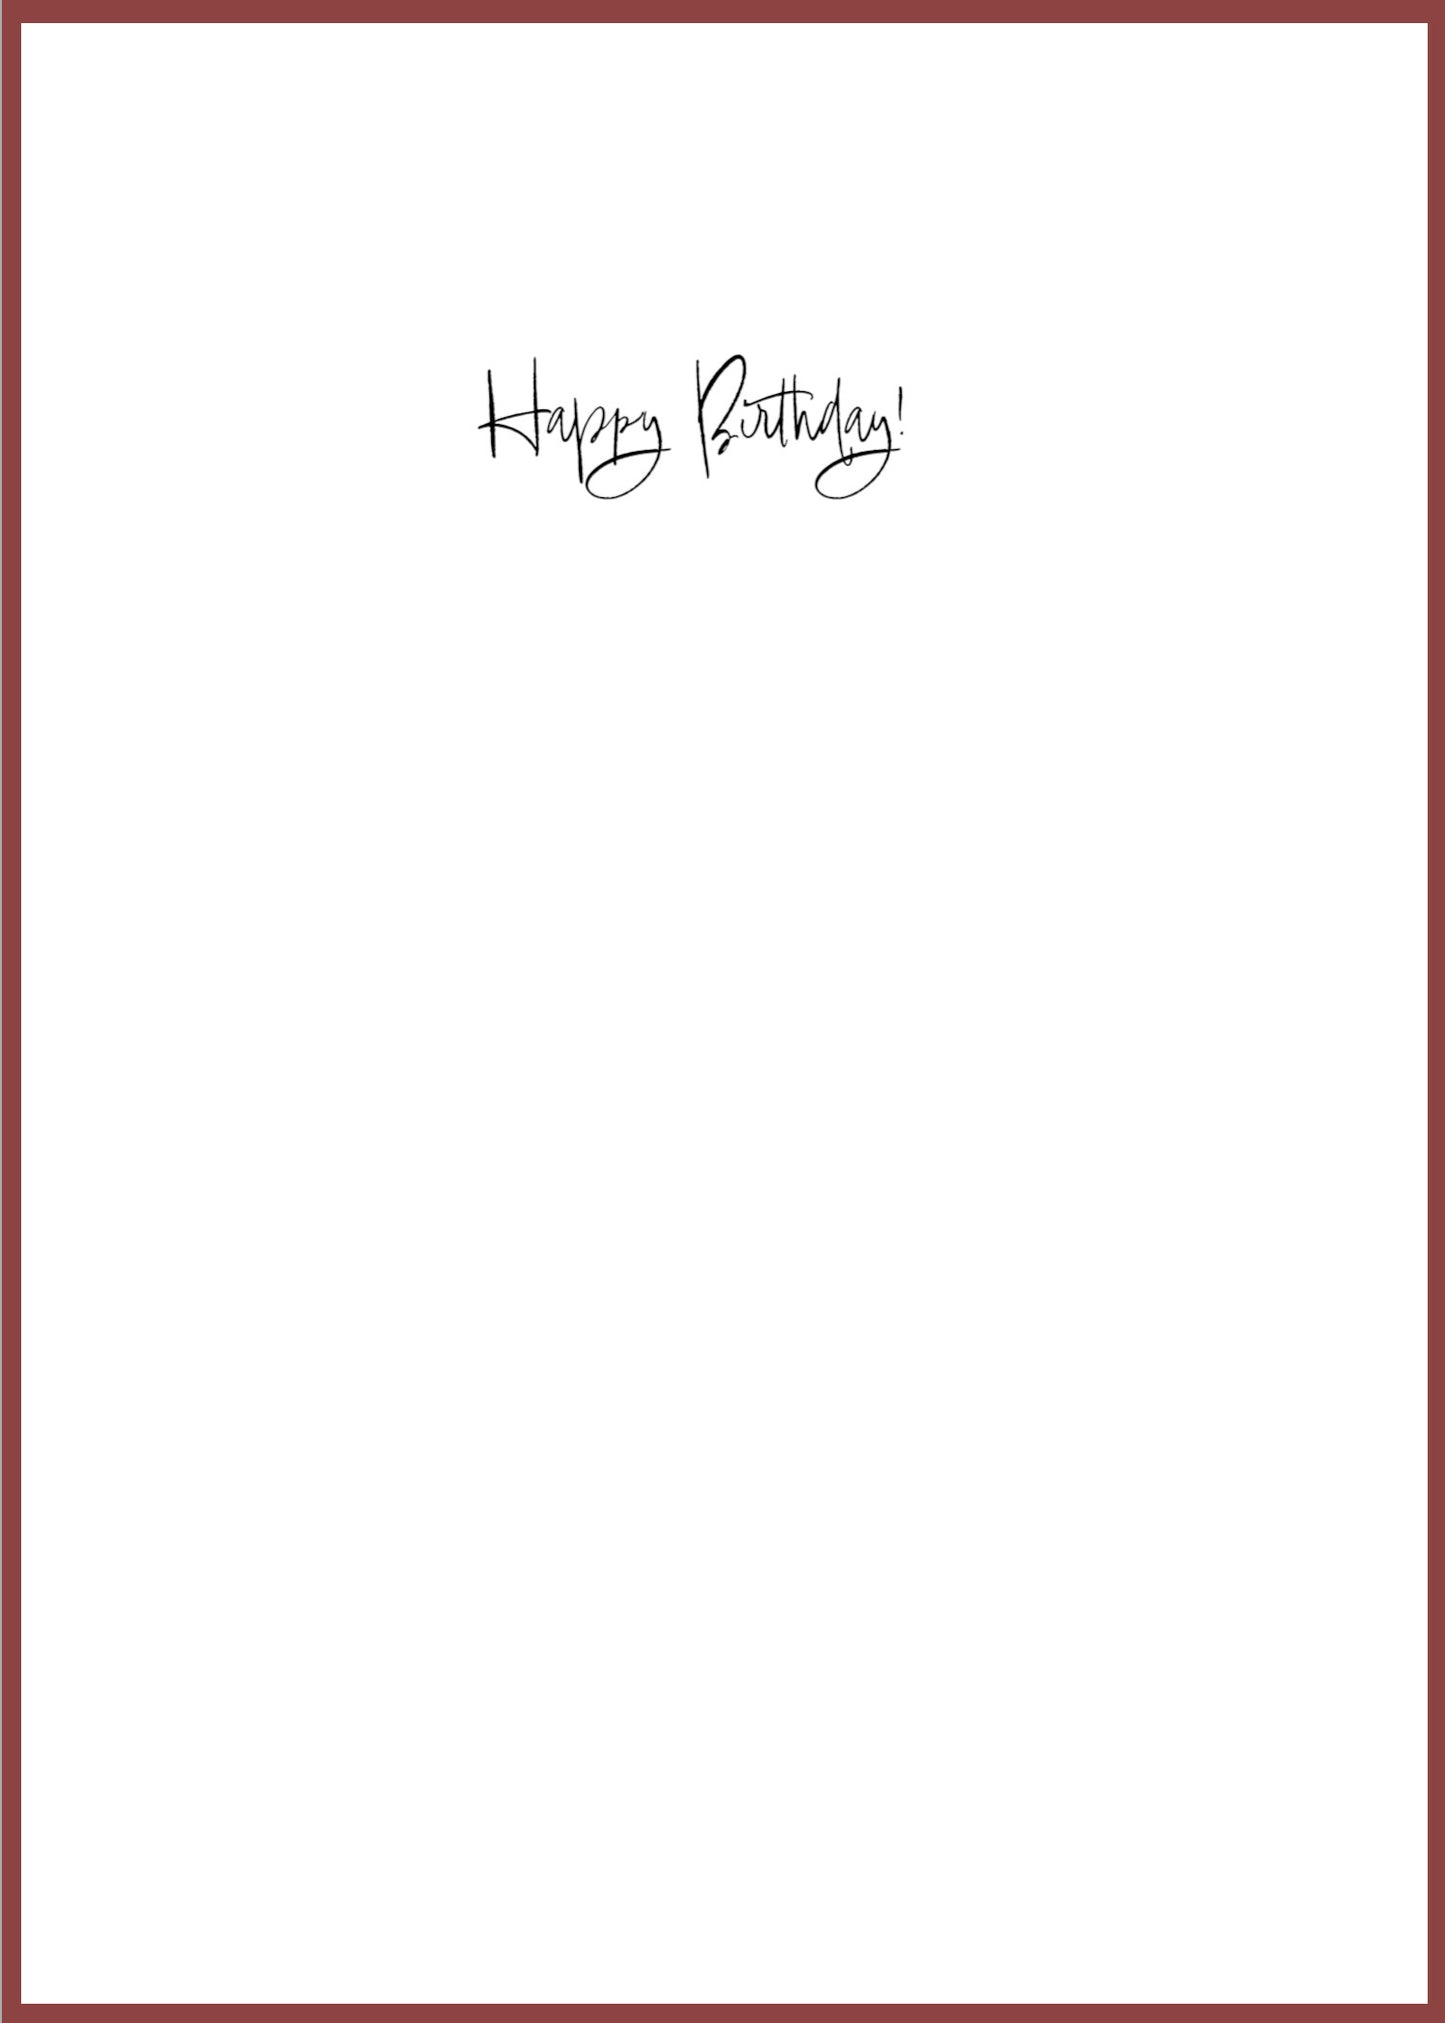 "Wine If You Want To" Greeting Card (Birthday)